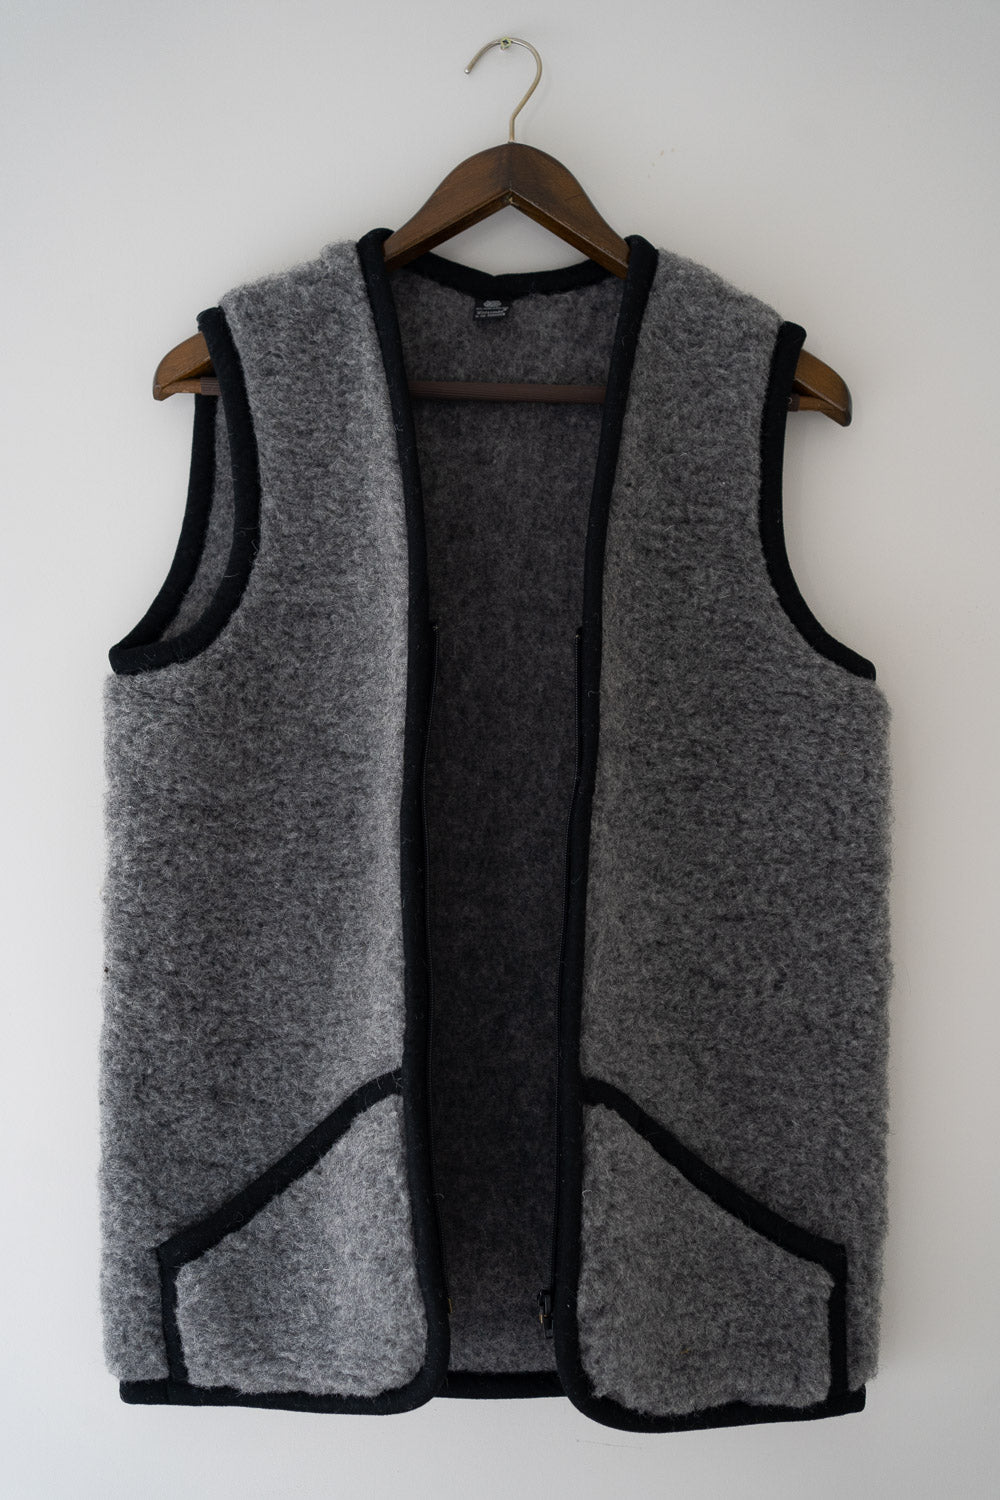 Merino wool grey vest very warm with the pockets on the sides. Zipped woollen gilet